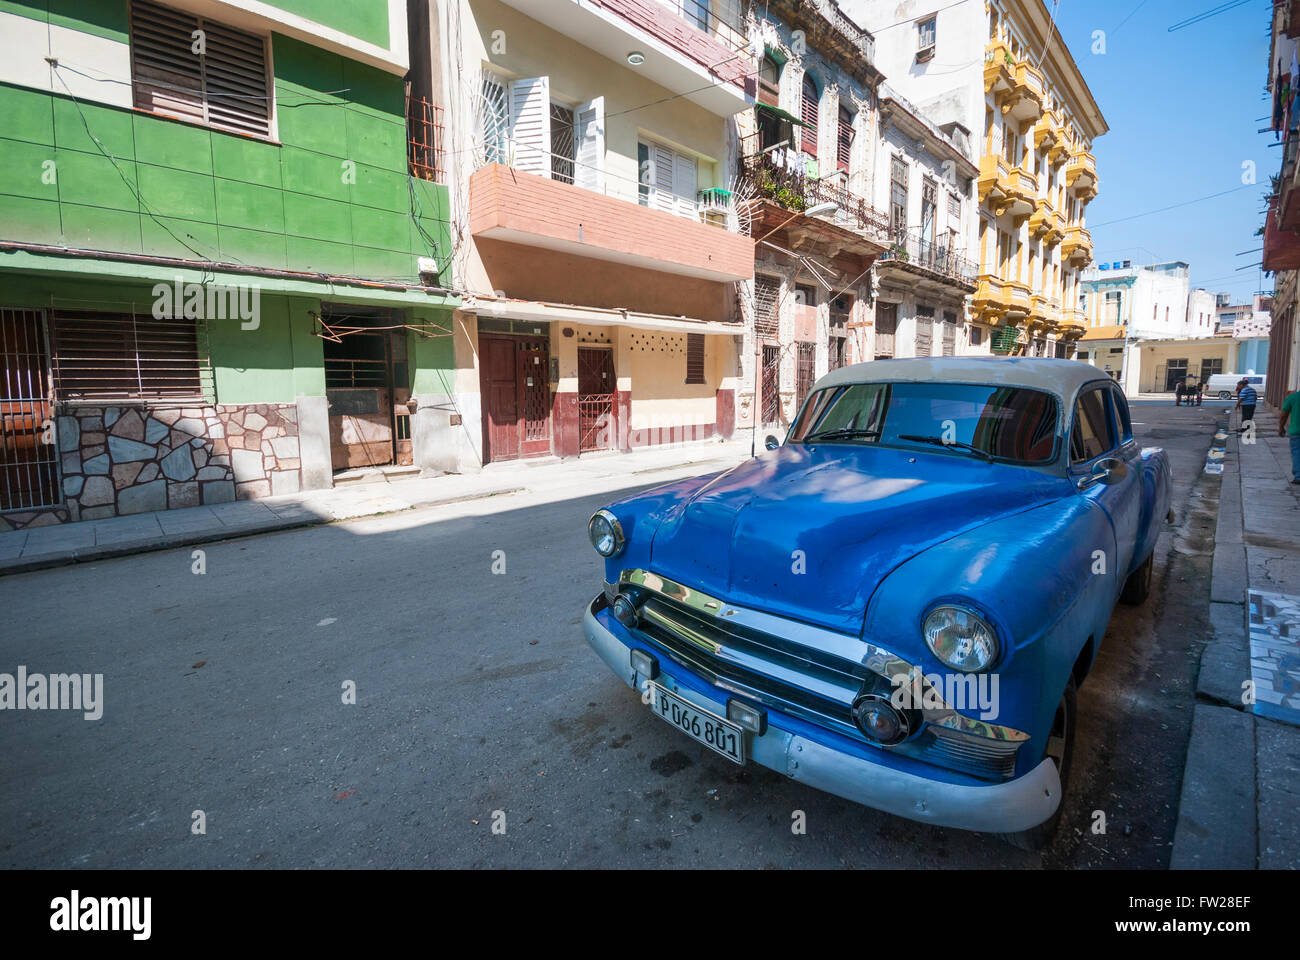 A classic antique American Chevrolet car undergoing body work and parked on a side street in Central Havana Cuba Stock Photo